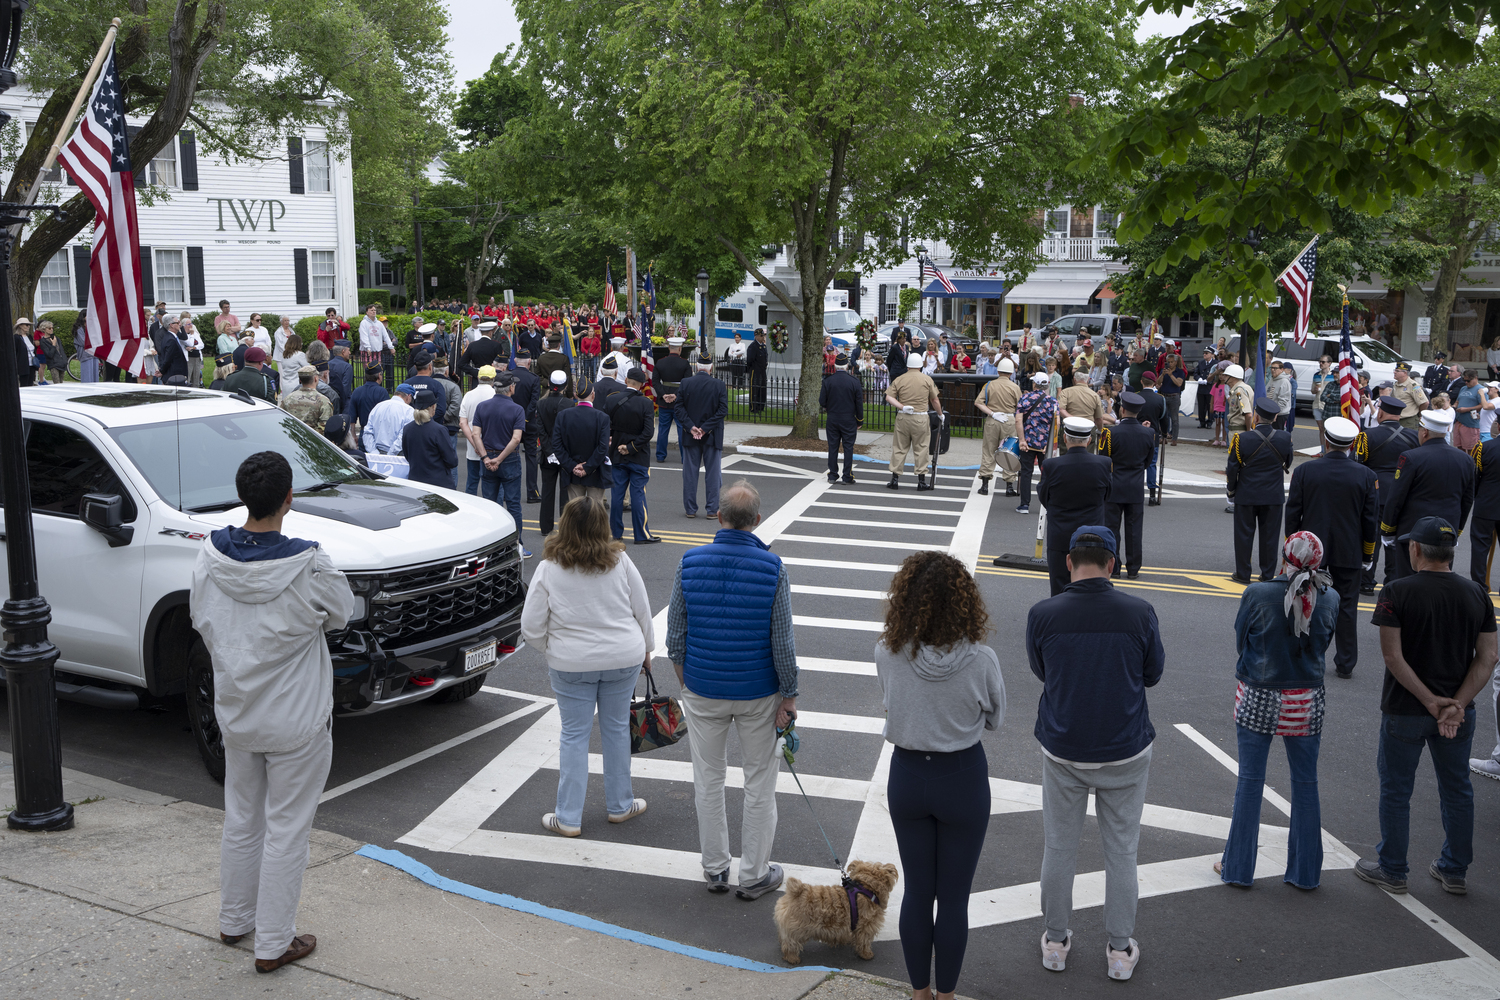 A large crowd gathers at the Civil War Monument at Sag Harbor's Memorial Day observance. LORI HAWKINS